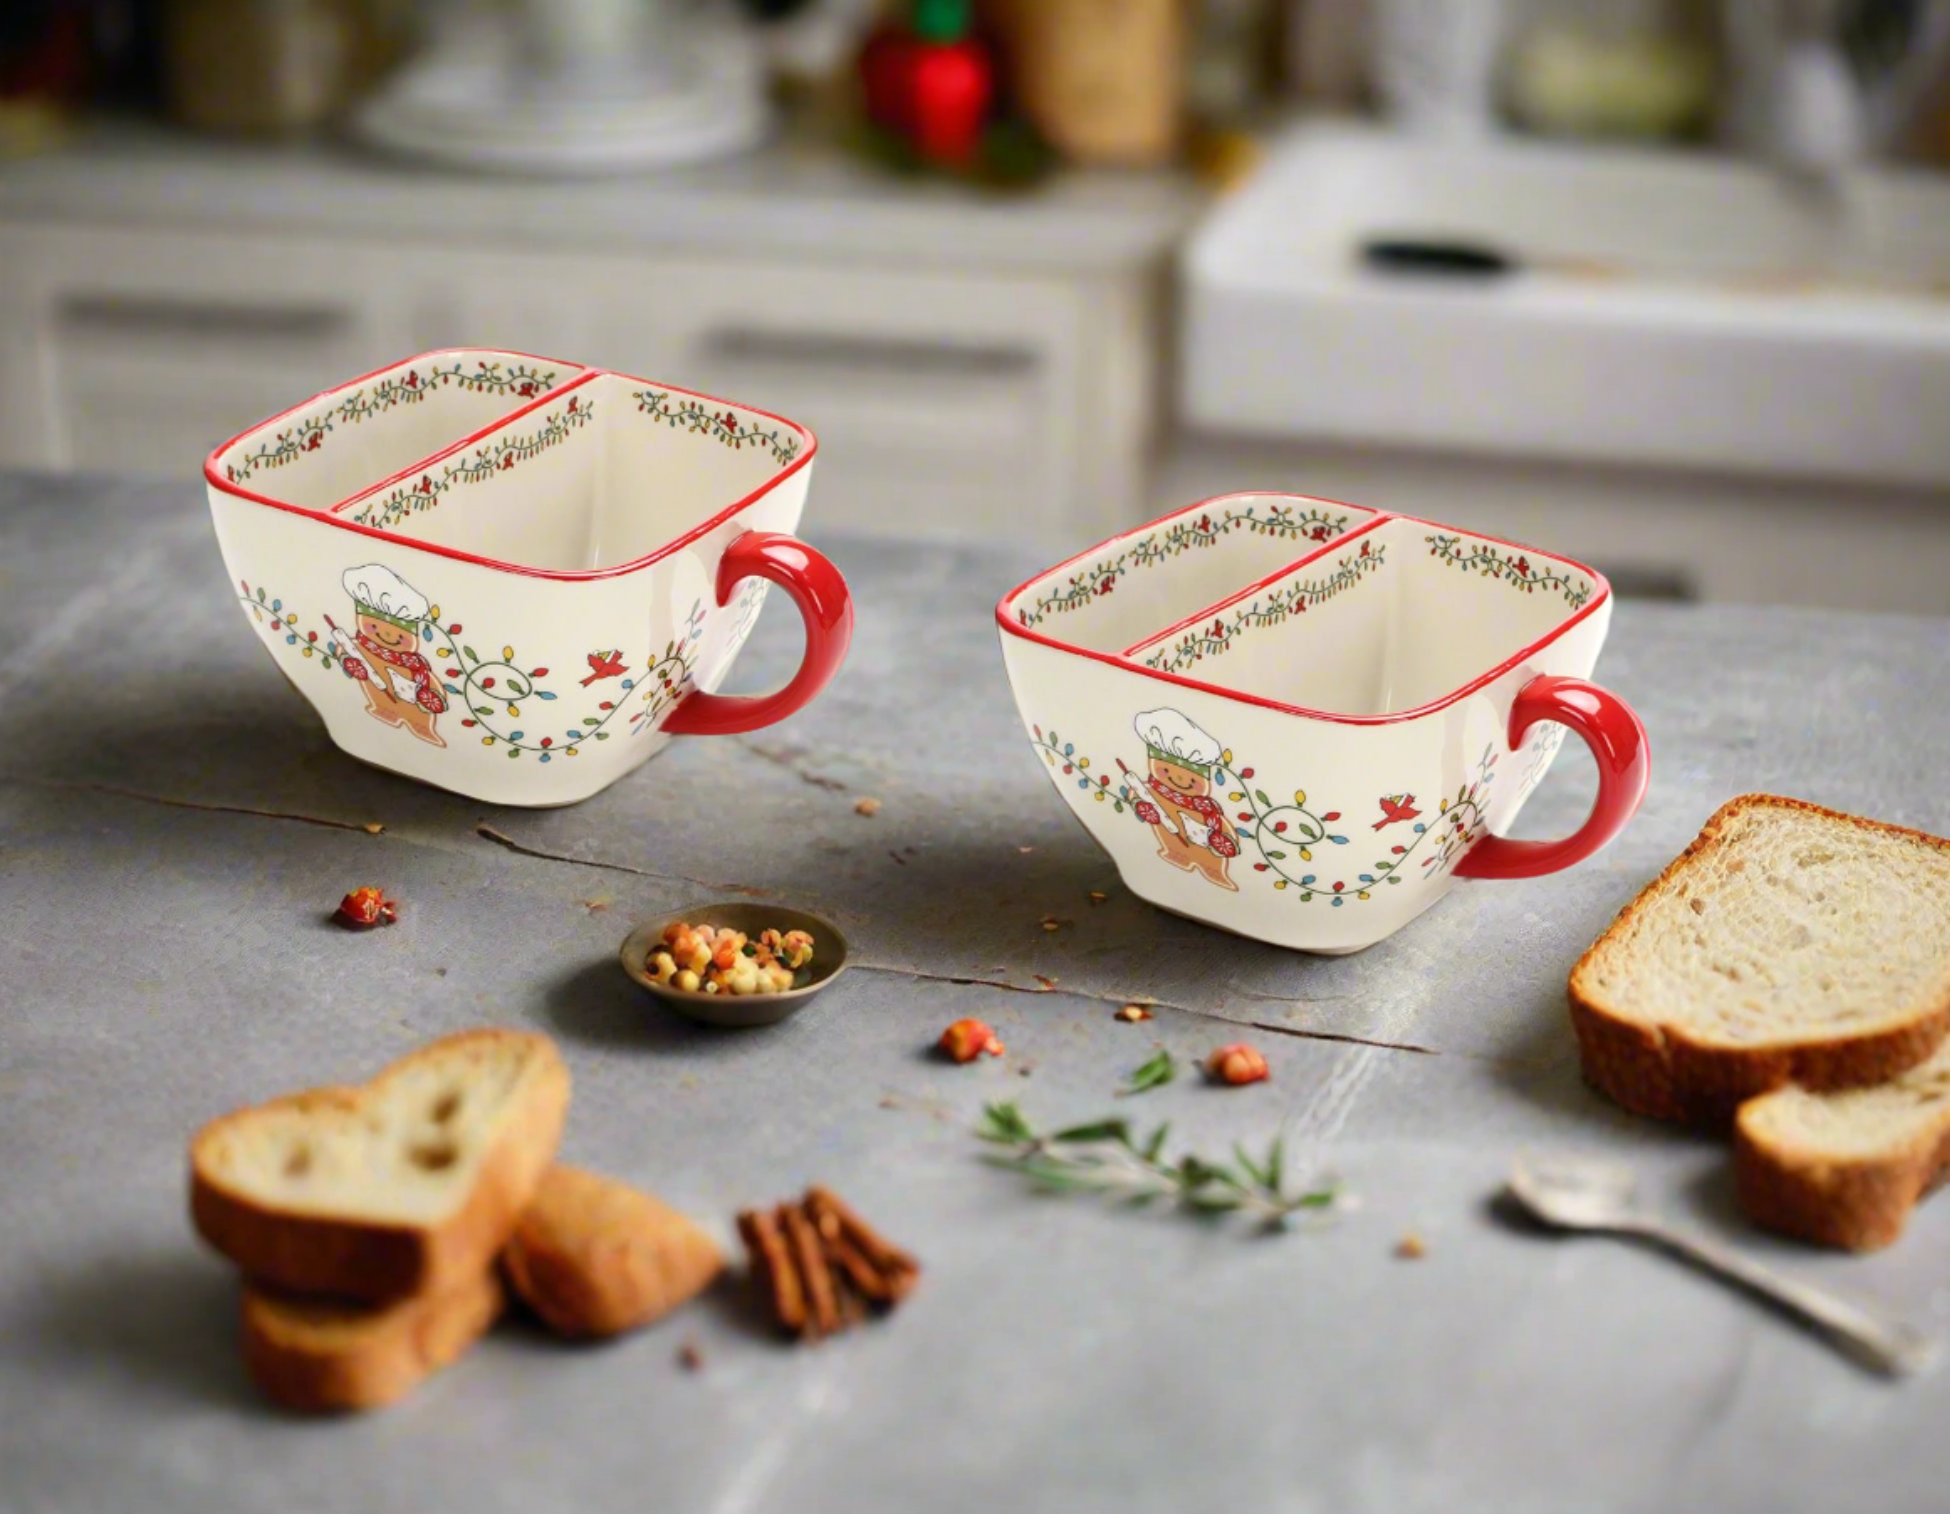 Temp-tations Merry Chef Soup Mugs on kitchen counter with bread and herbs